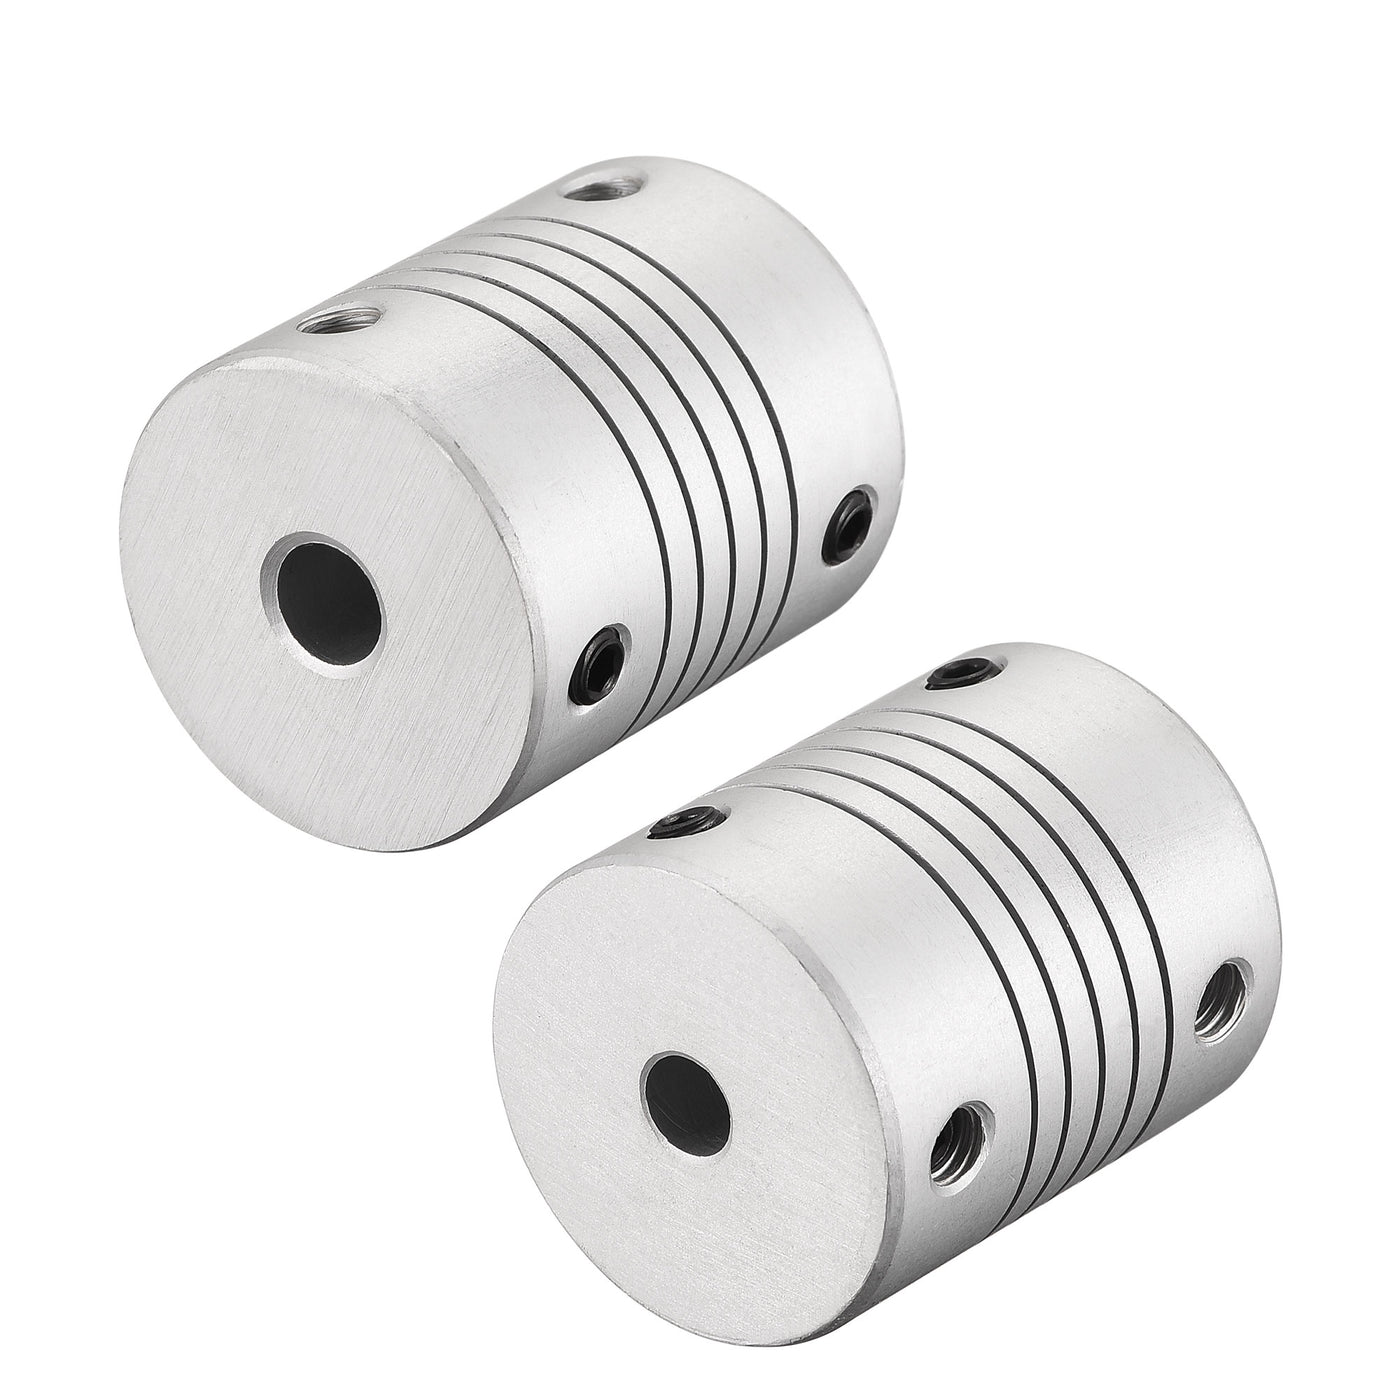 uxcell Uxcell 6mm to 5mm Aluminum Alloy Shaft Coupling Flexible Coupler L30xD25 Silver